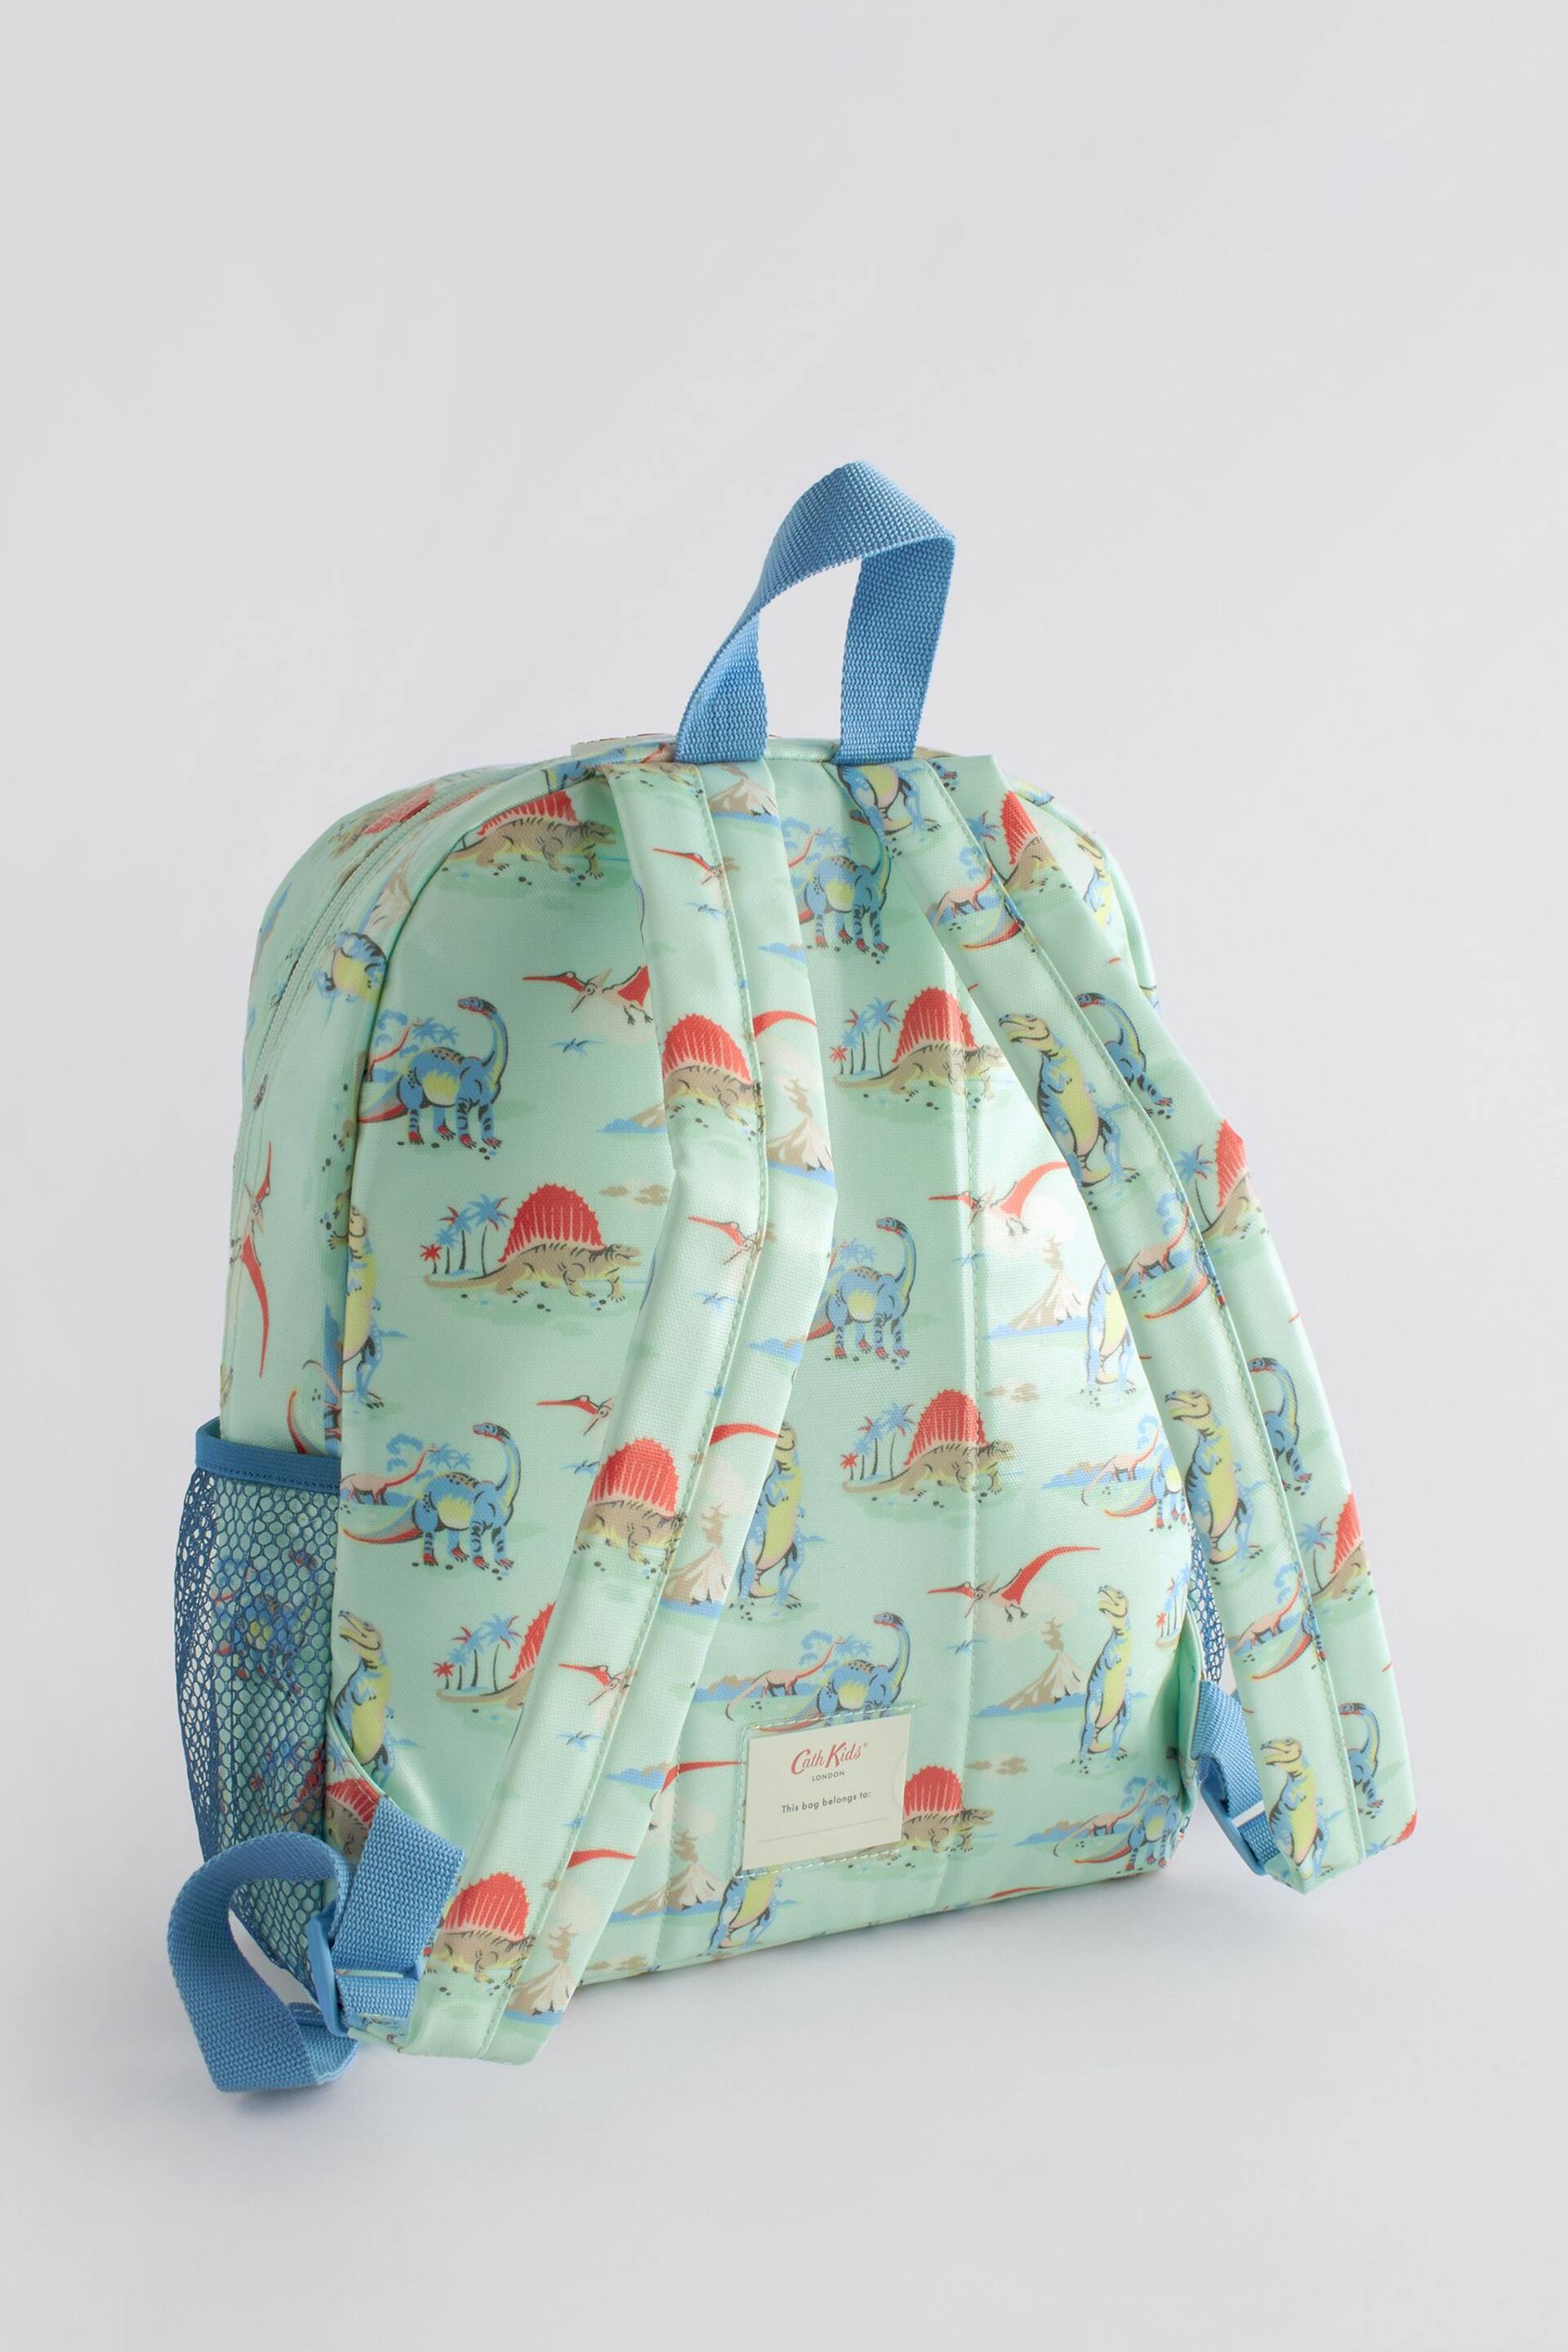 Cath Kidston Green Dinosaurs Print Large Backpack - Image 2 of 8